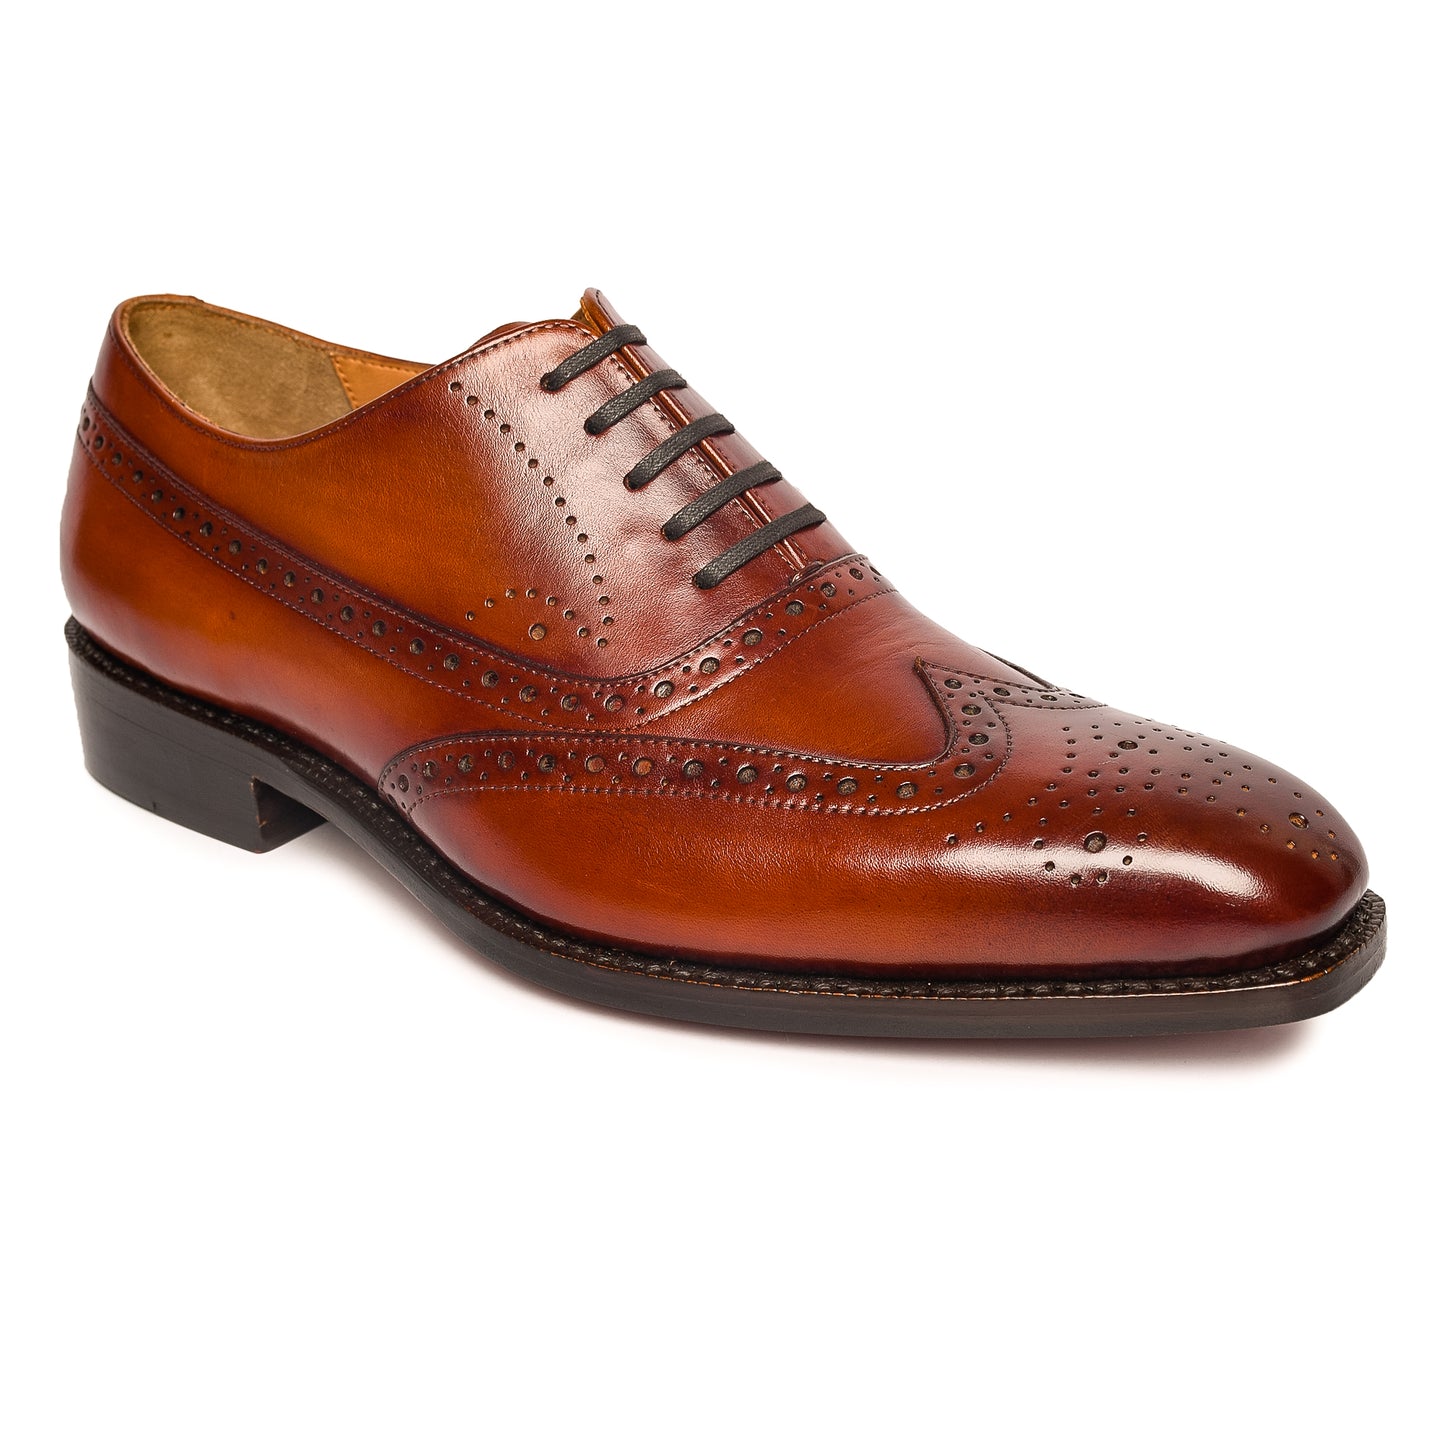 Nomi leather Oxford brogues by Northman+